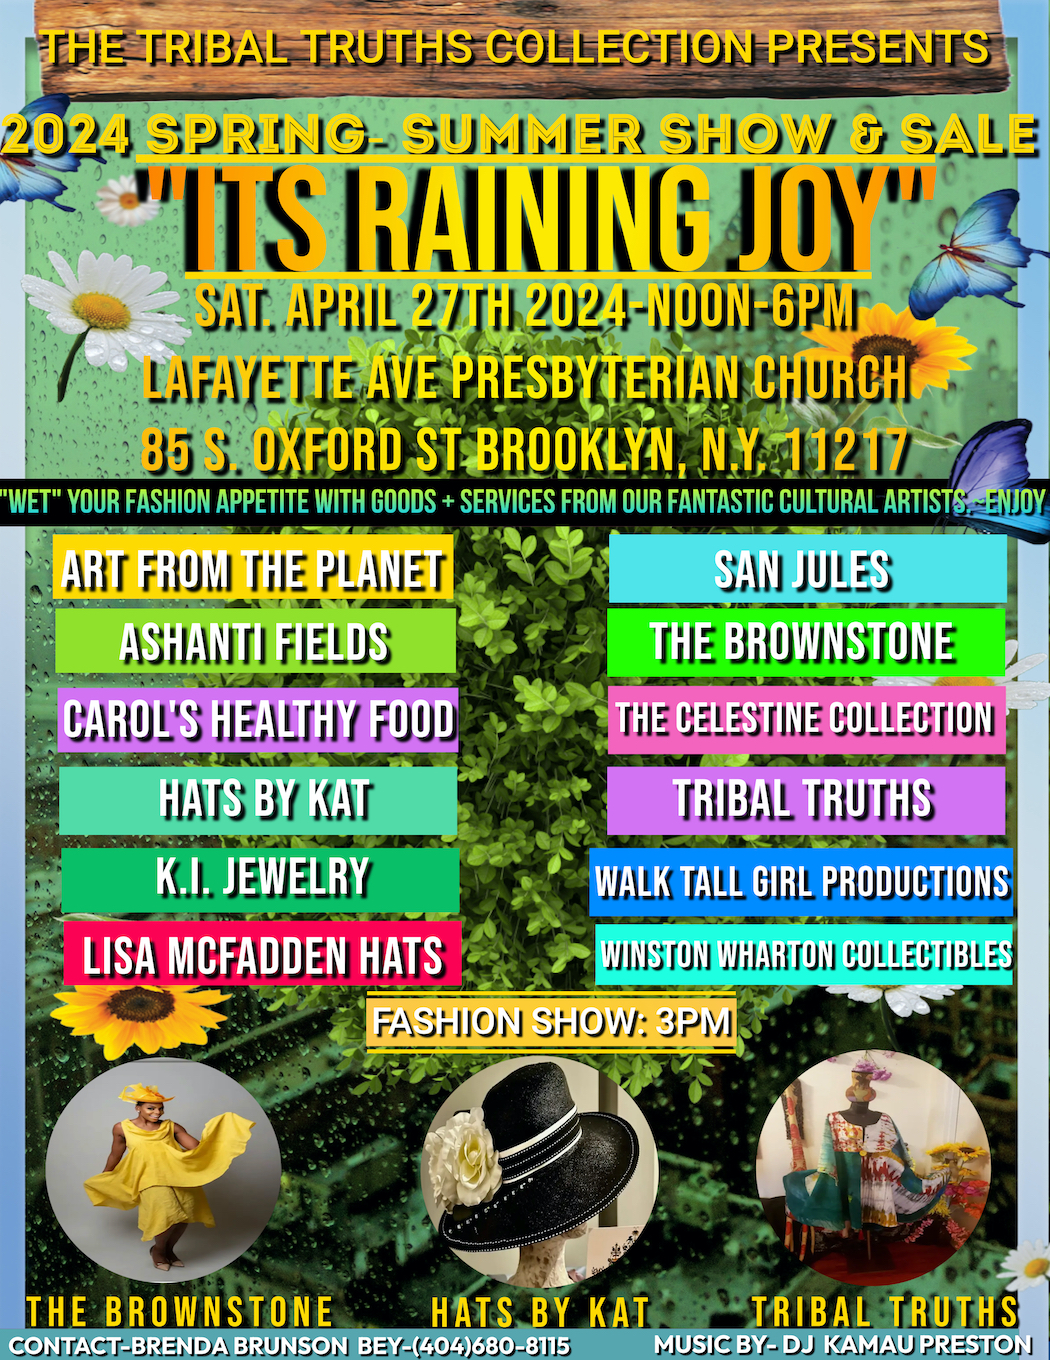 Multi-color poster with text describing the event with the headline 'Its Raining Joy'